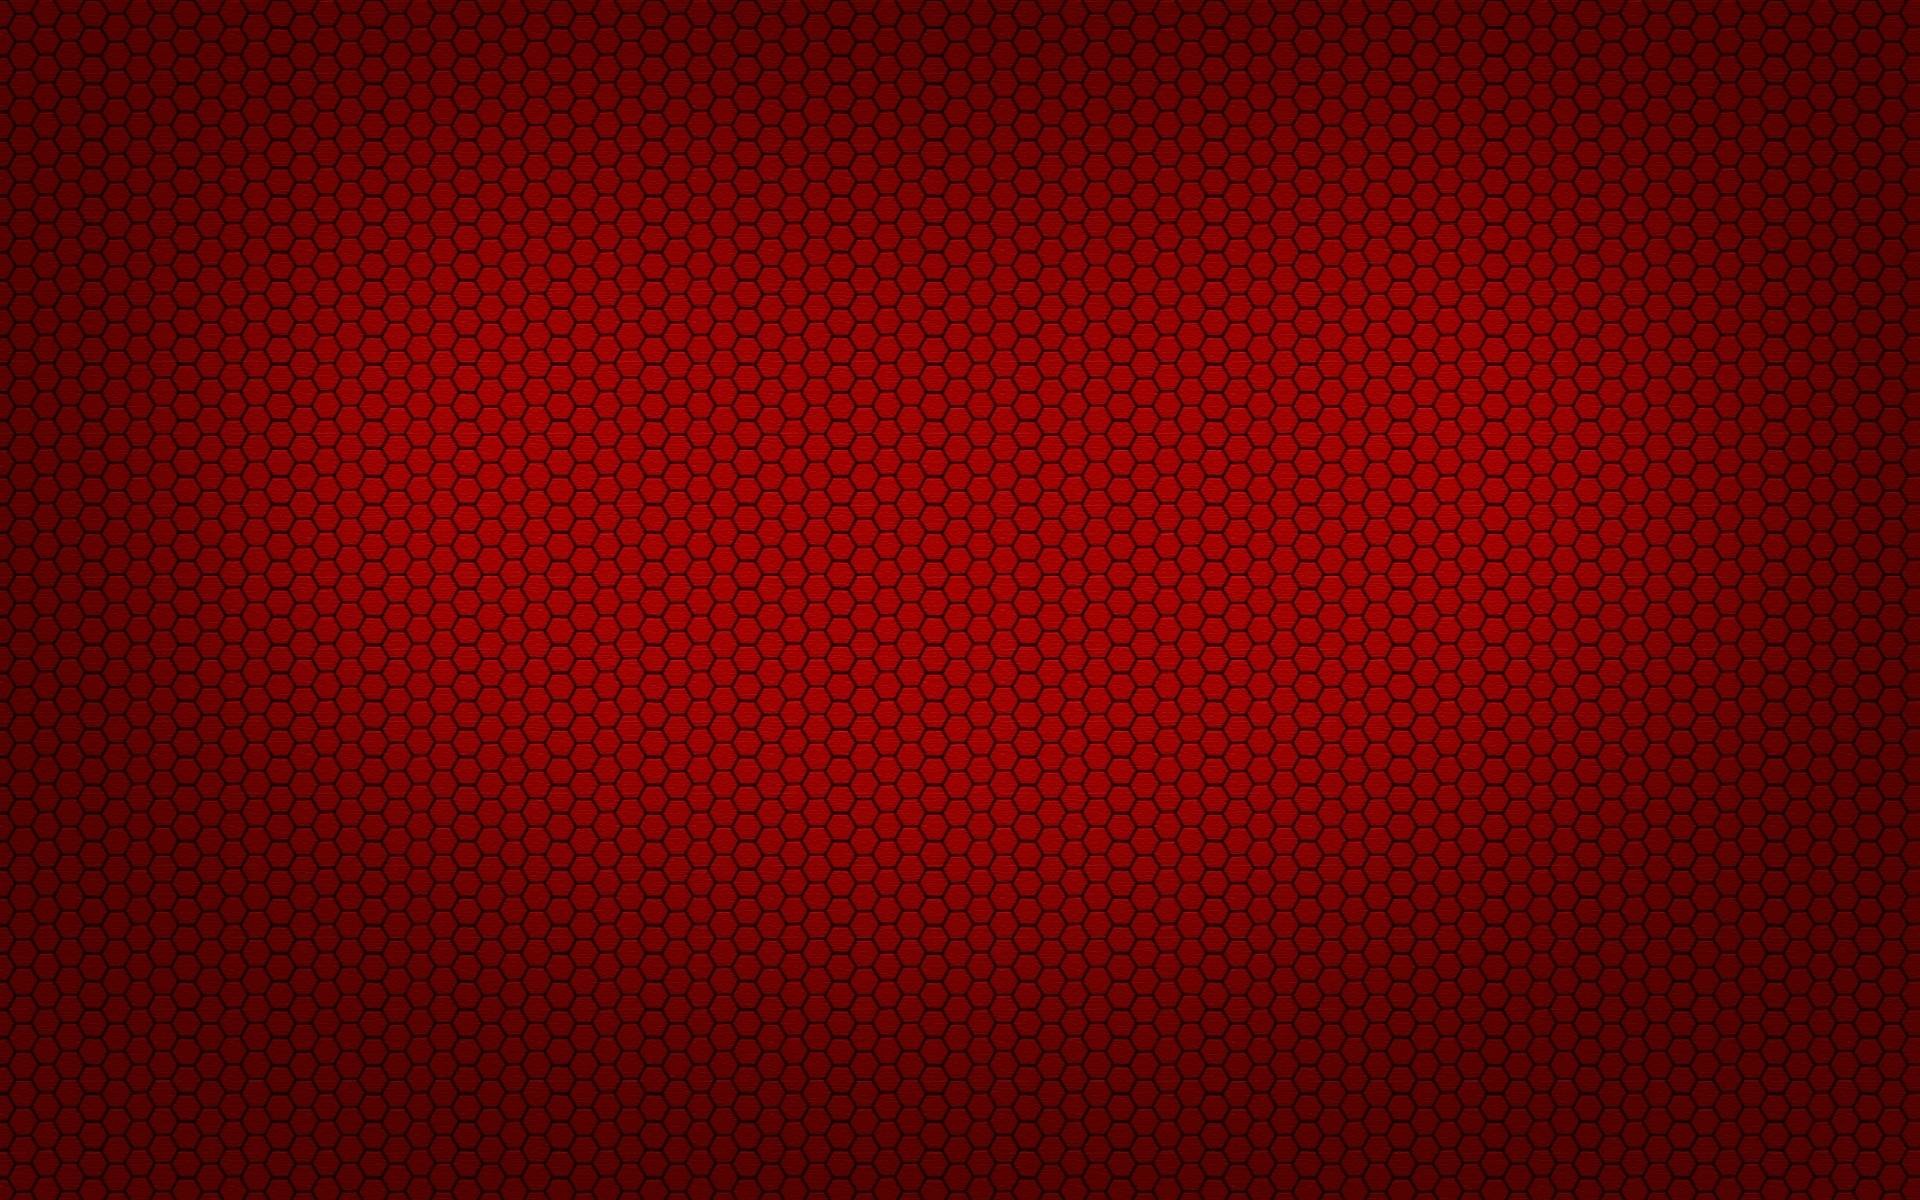 Wallpaper Red and Brown Light Reflection Background  Download Free Image